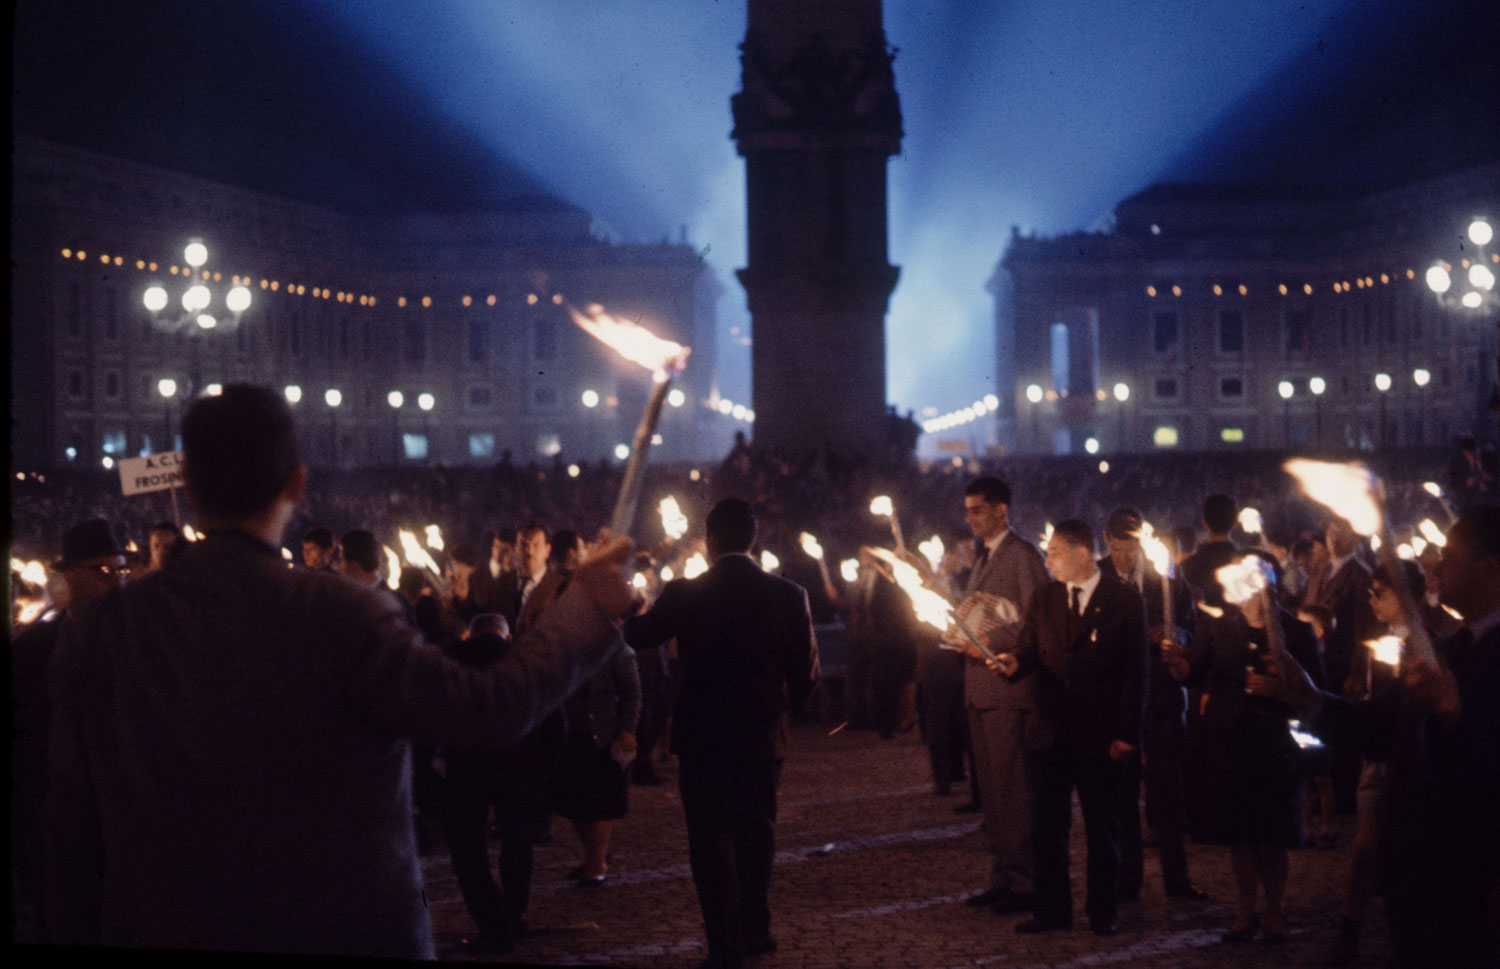 Scene in Rome during the Second Vatican Ecumenical Council, 1962.